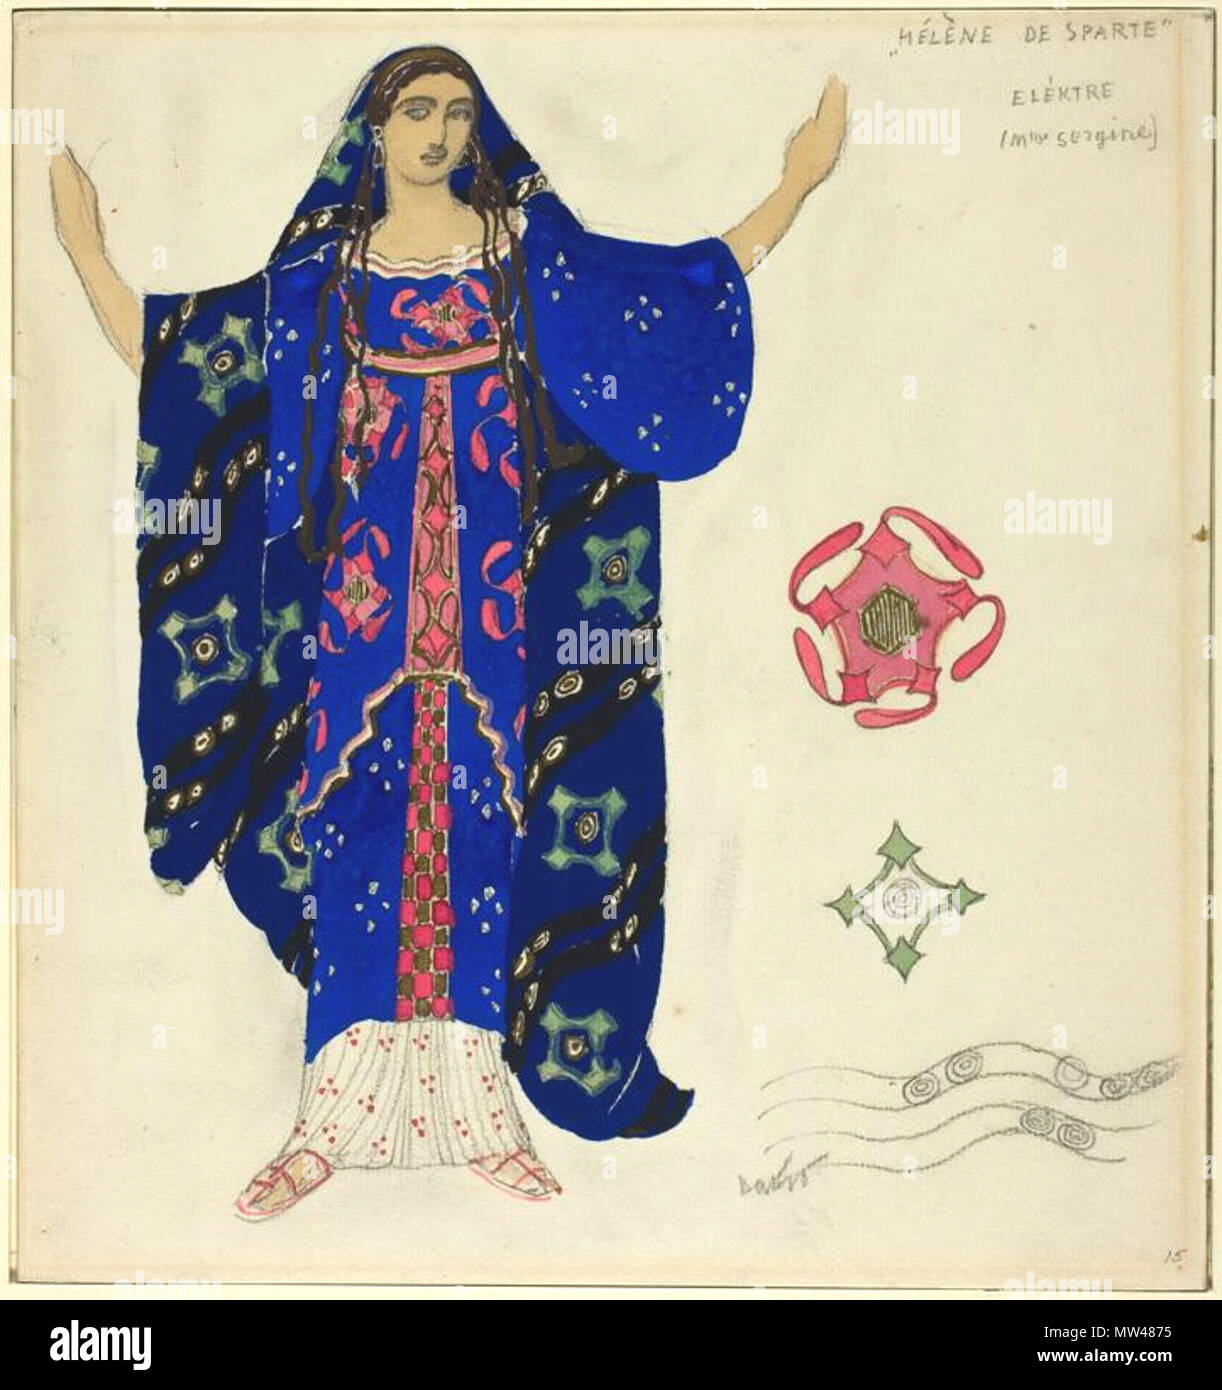 . Léon Bakst Russian, 1868-1924 Costume Design for Electra, for Helen of Sparta, n.d. Gouache and watercolor, with graphite and metallic paint, on ivory laid paper, laid down on tan board 270 x 254 mm Sidney A. Kent Fund, 1920.2523 . 20th century. Bakst 182 Electra, for Helen of Sparta by L.Bakst Stock Photo